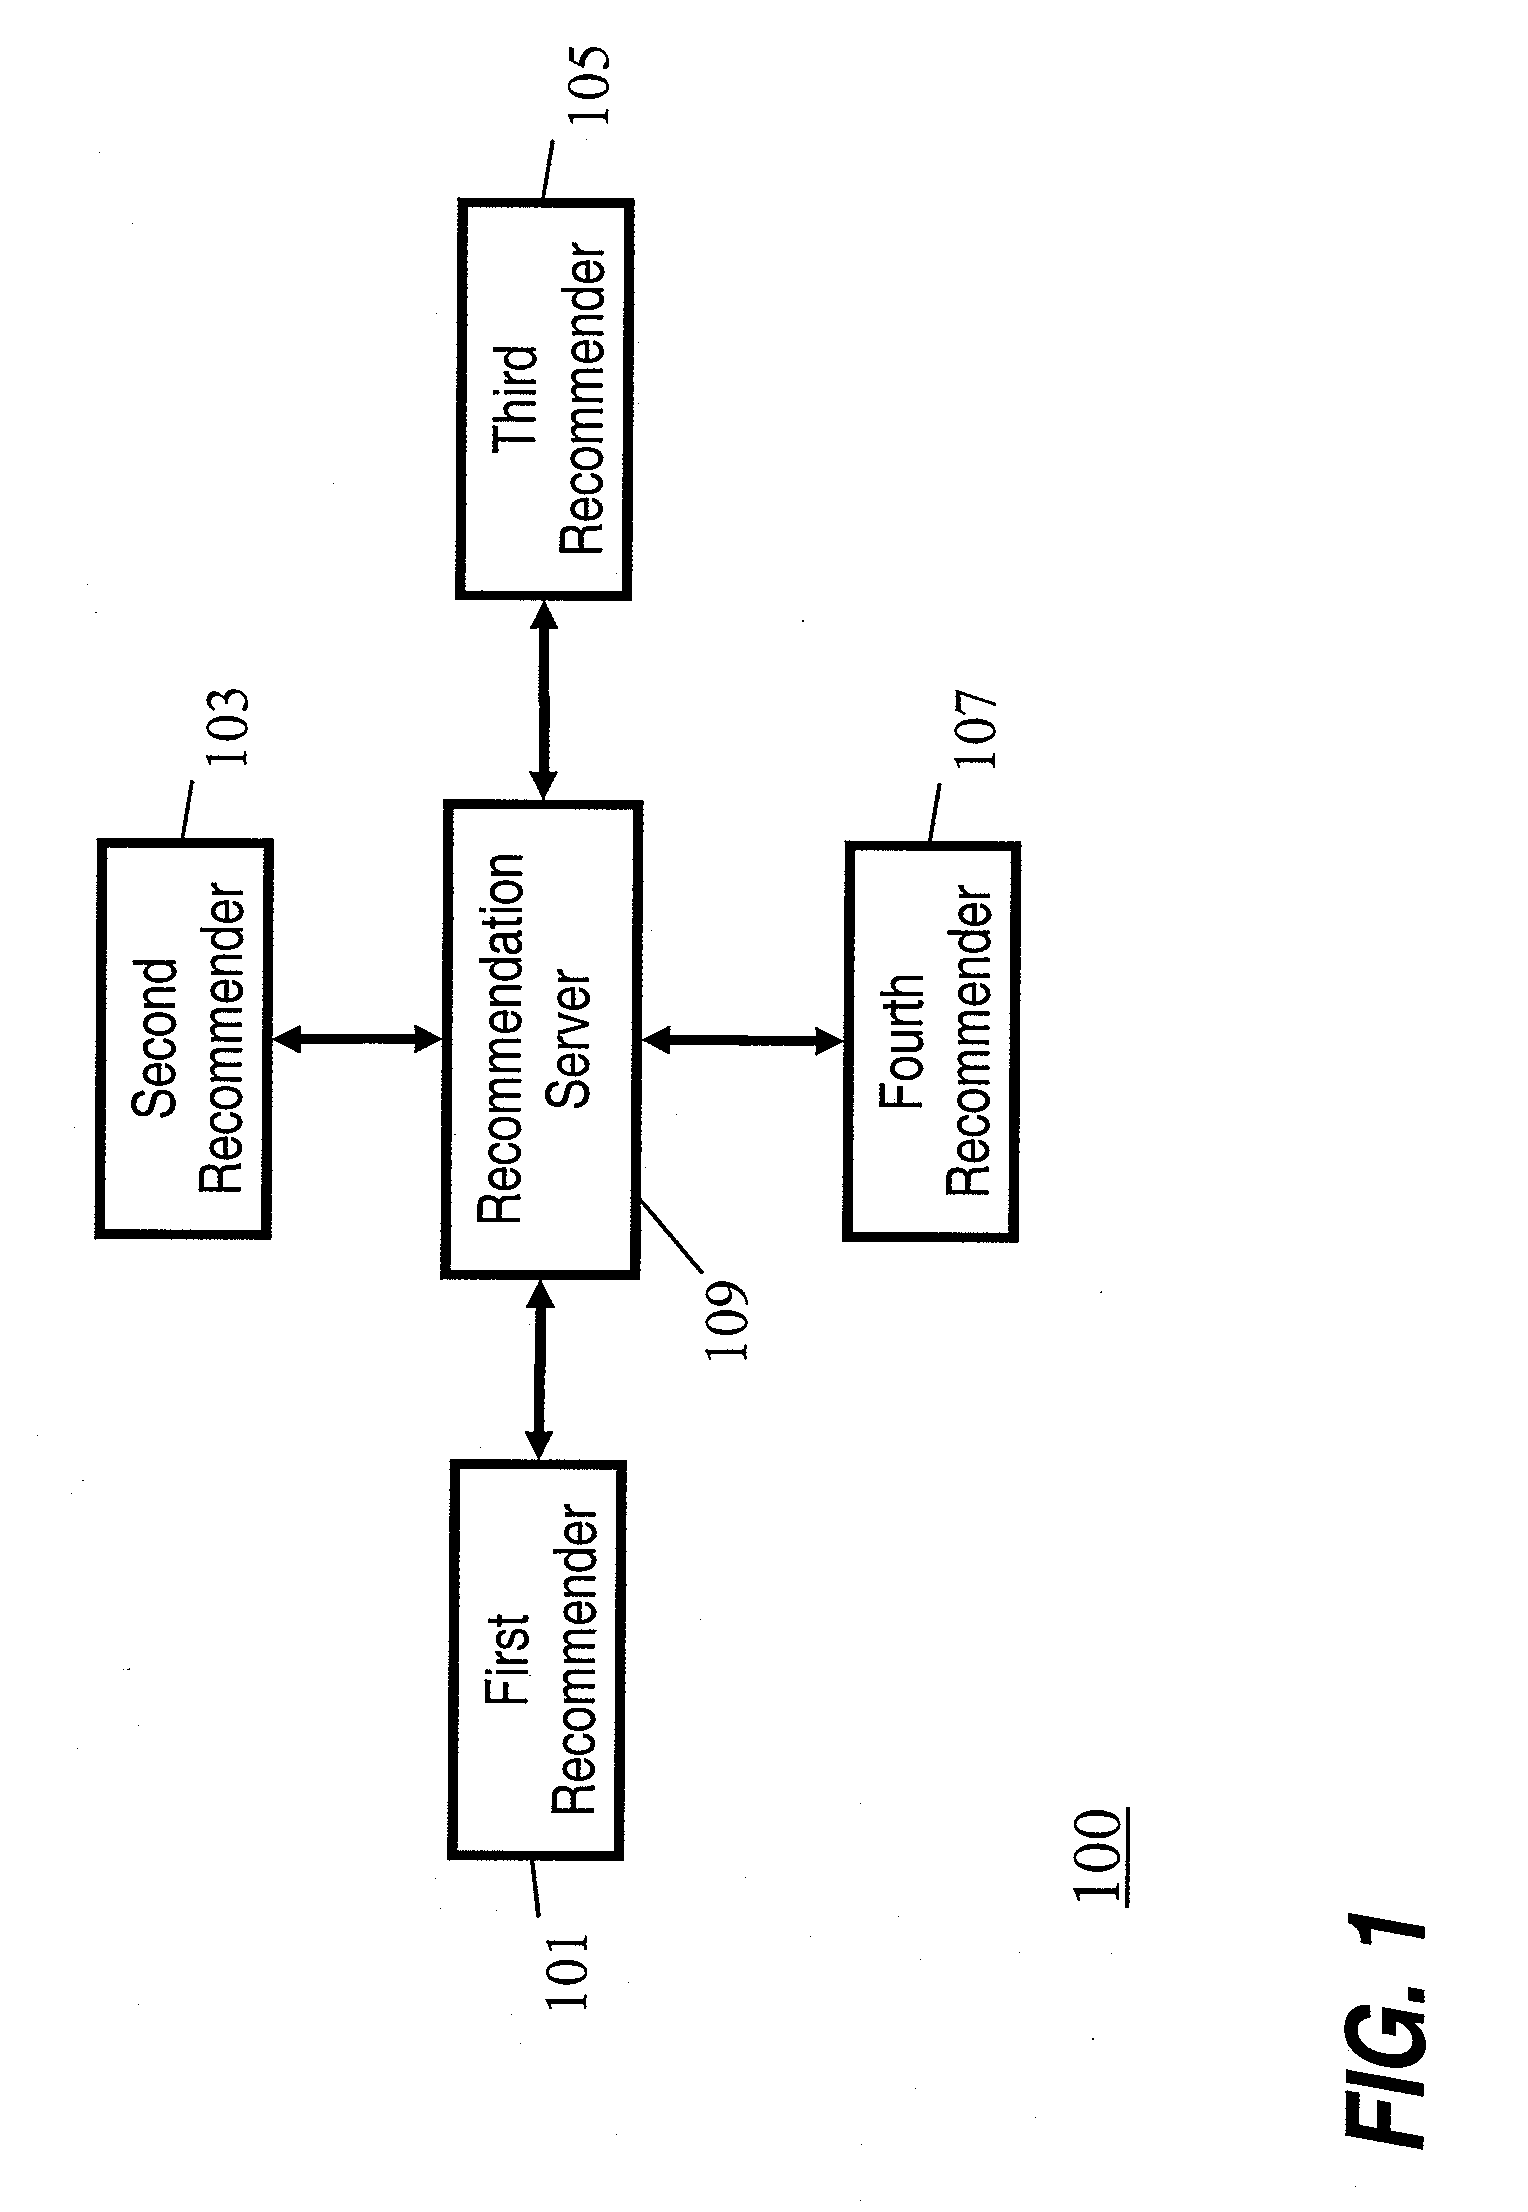 Recommendation system and method of operation therefor